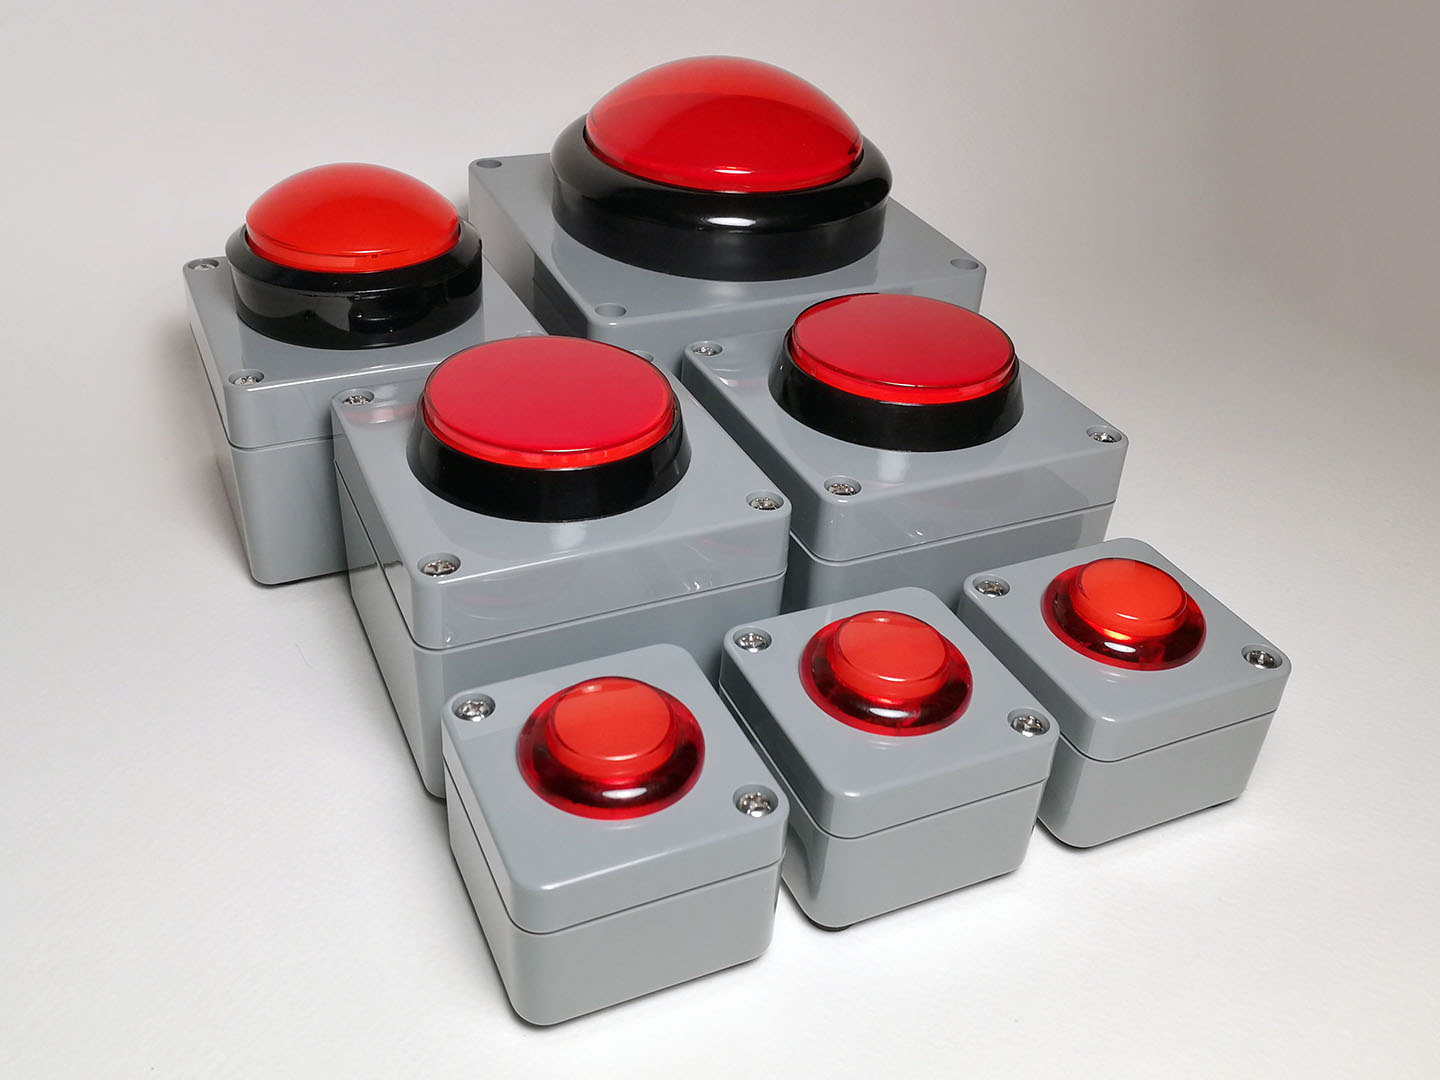 red push buttons